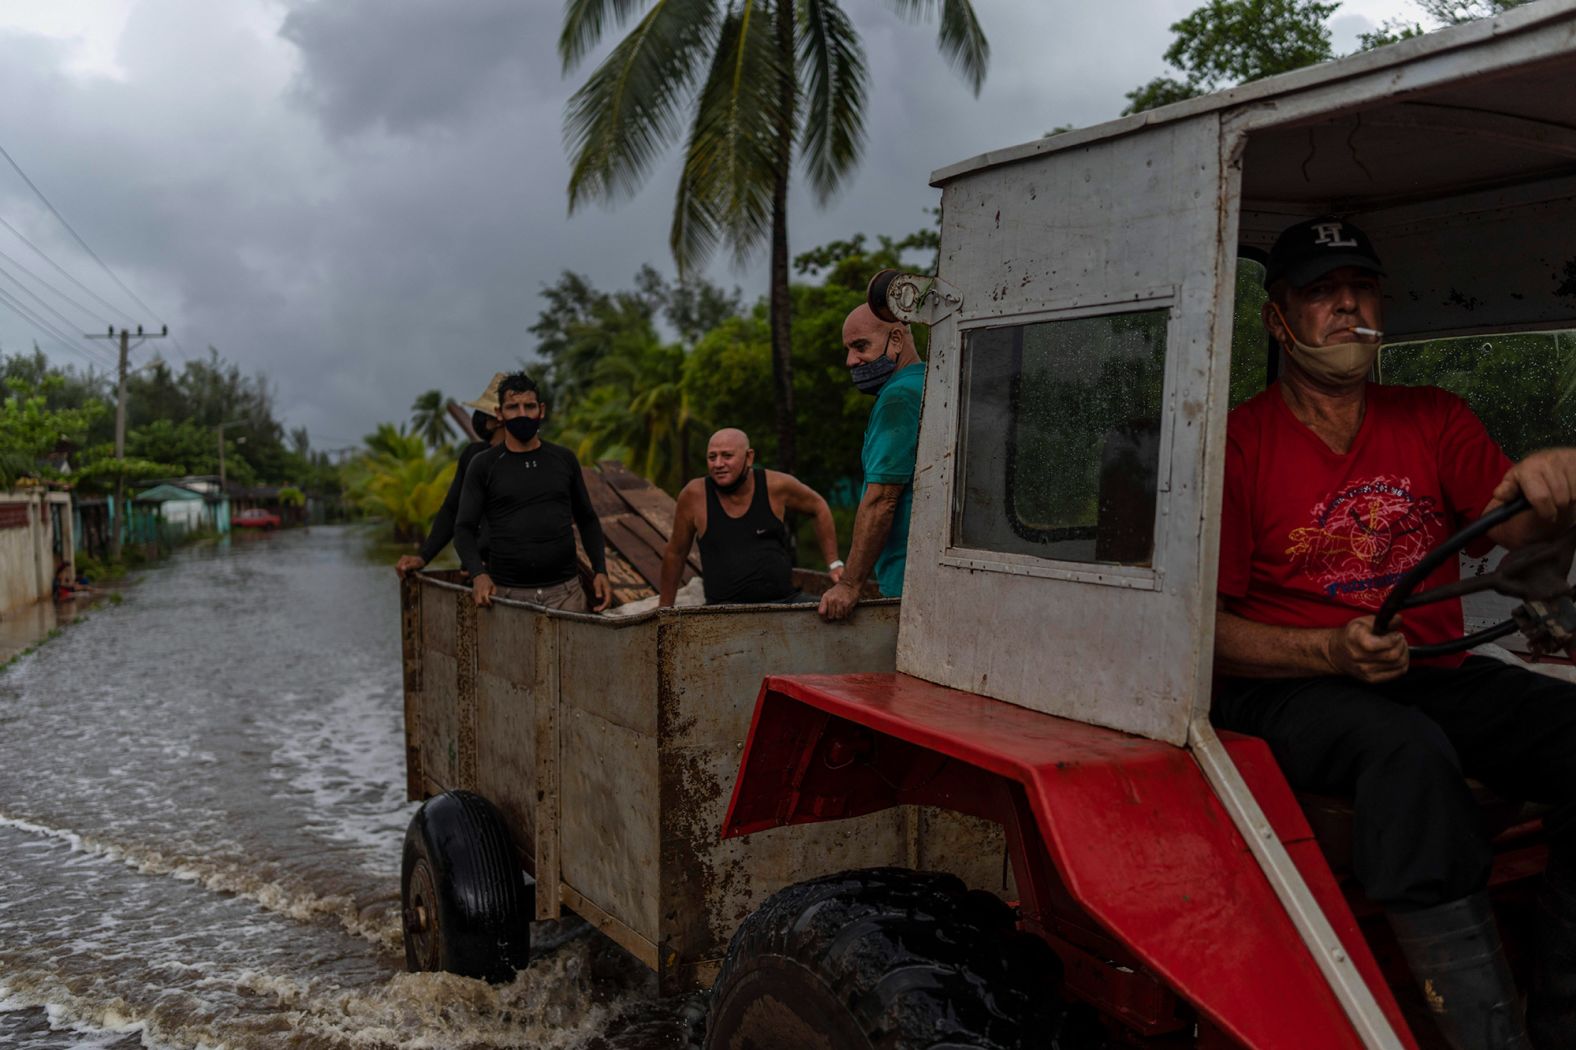 A man drives a tractor through a flooded street in Guanimar, Cuba, on August 28. Before entering the Gulf, Ida made landfall twice over Cuba as a Category 1 hurricane.